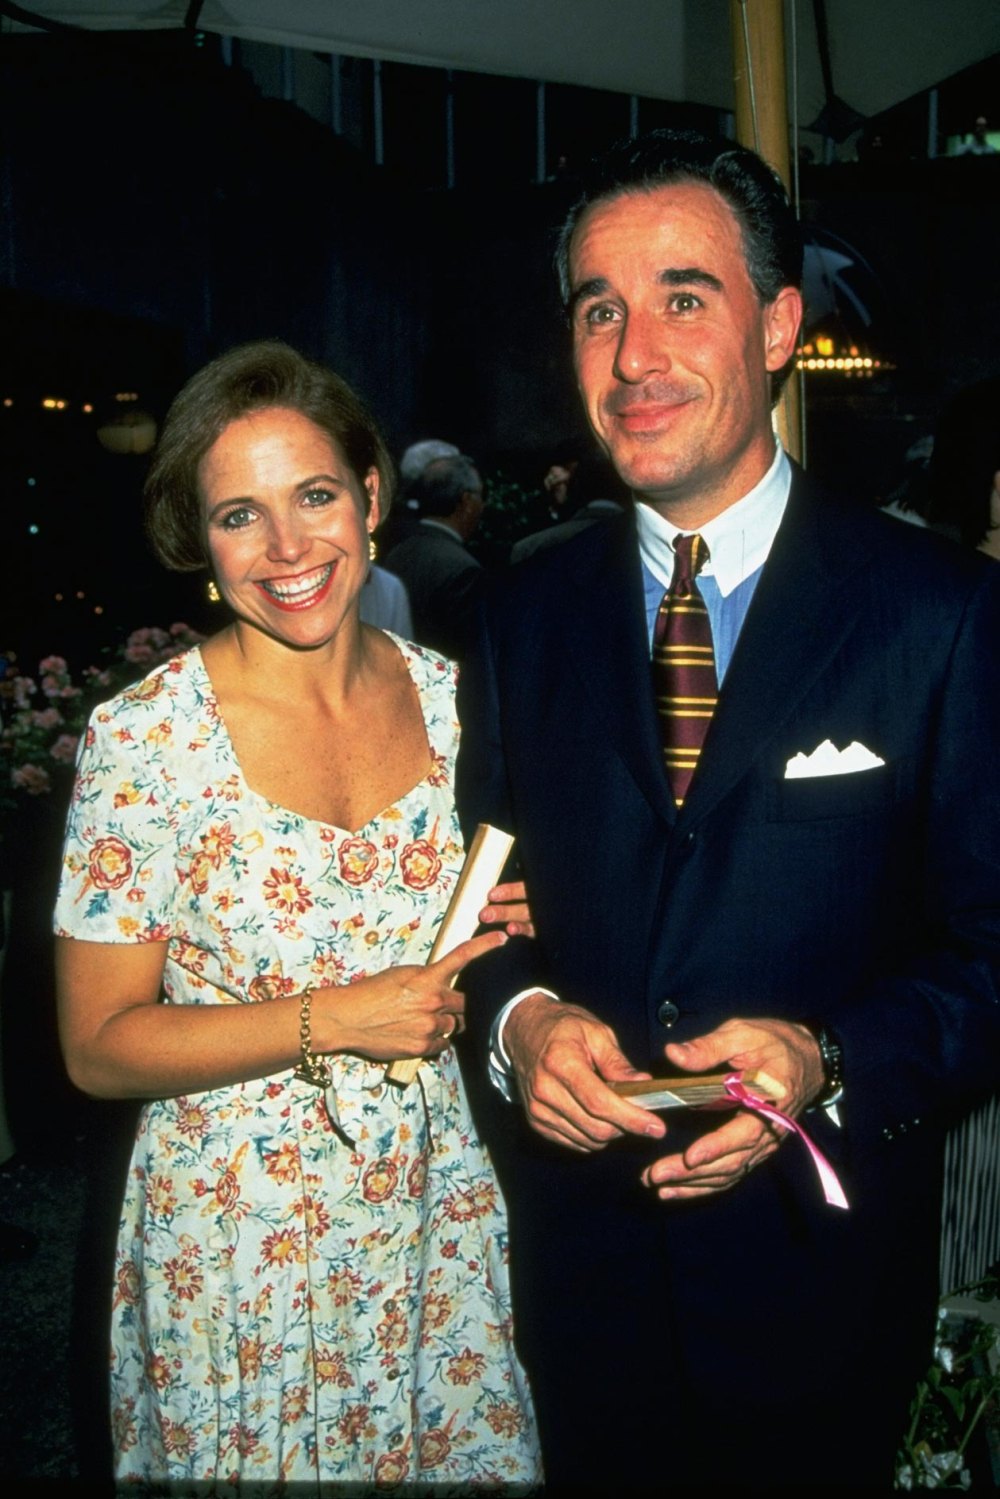 Katie Couric Shares the Secret Behind Her Nearly 10 Year Marriage With Husband John Molner 951